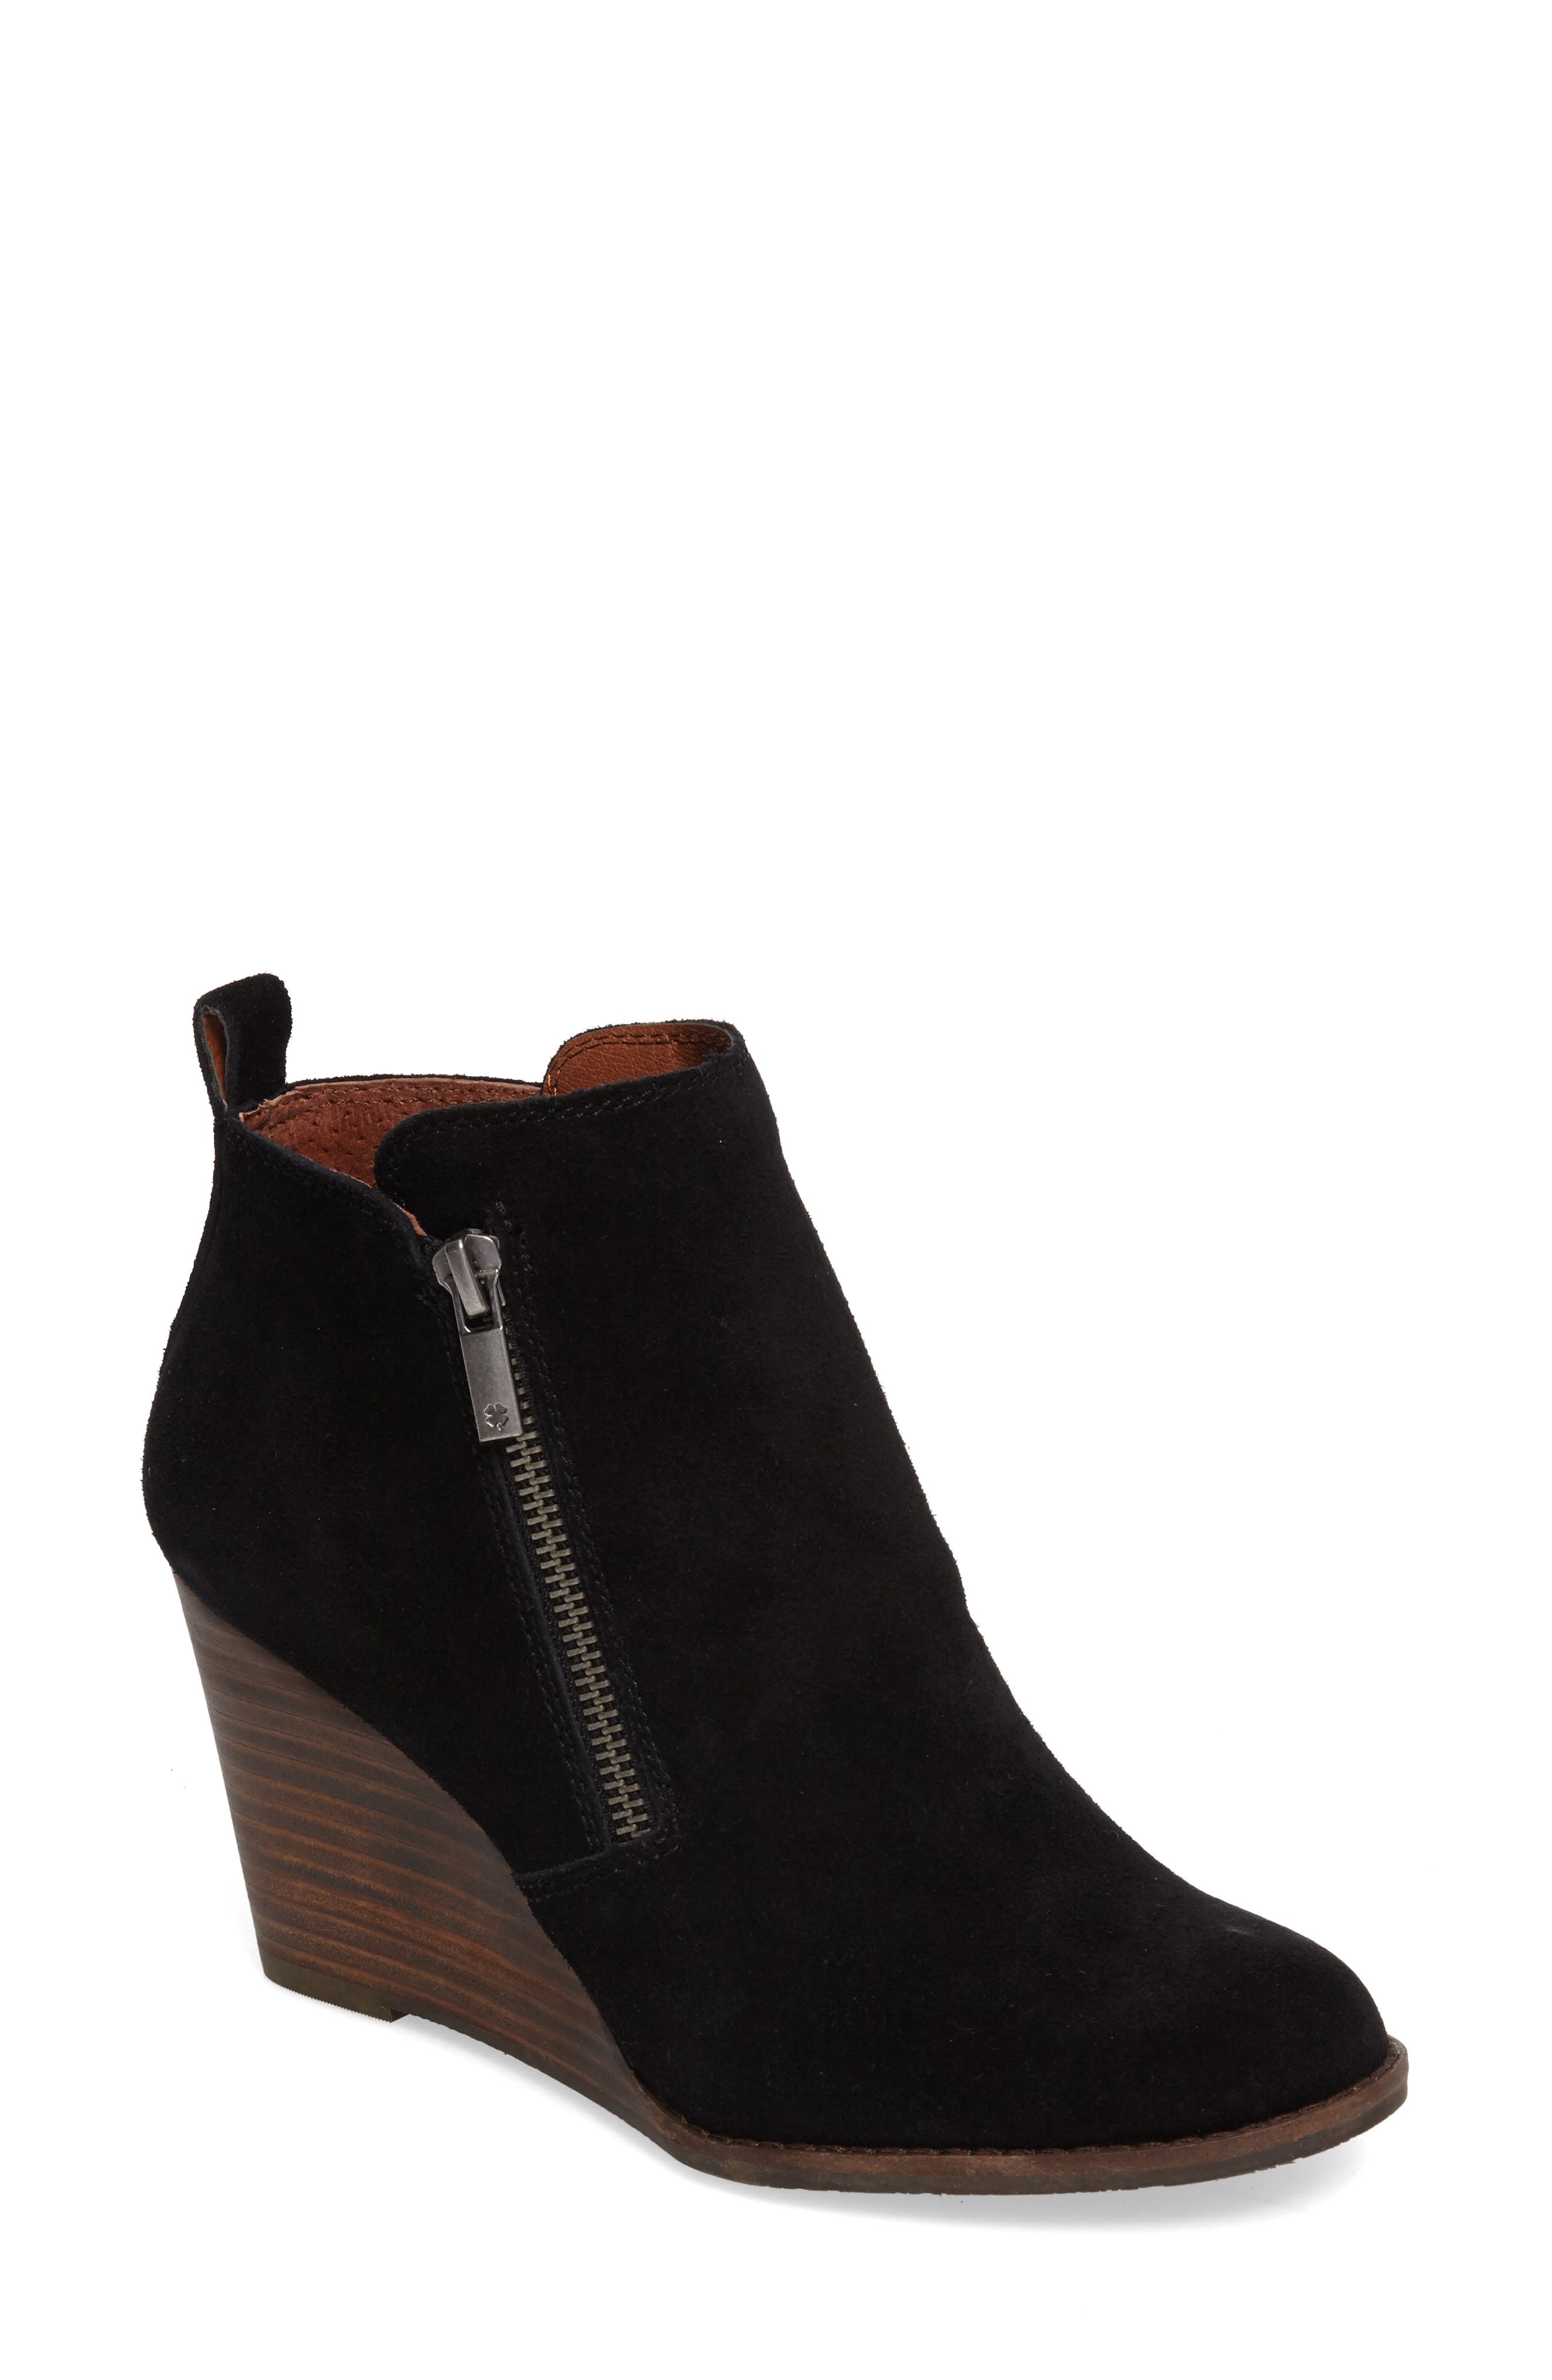 lucky brand wedge ankle boots